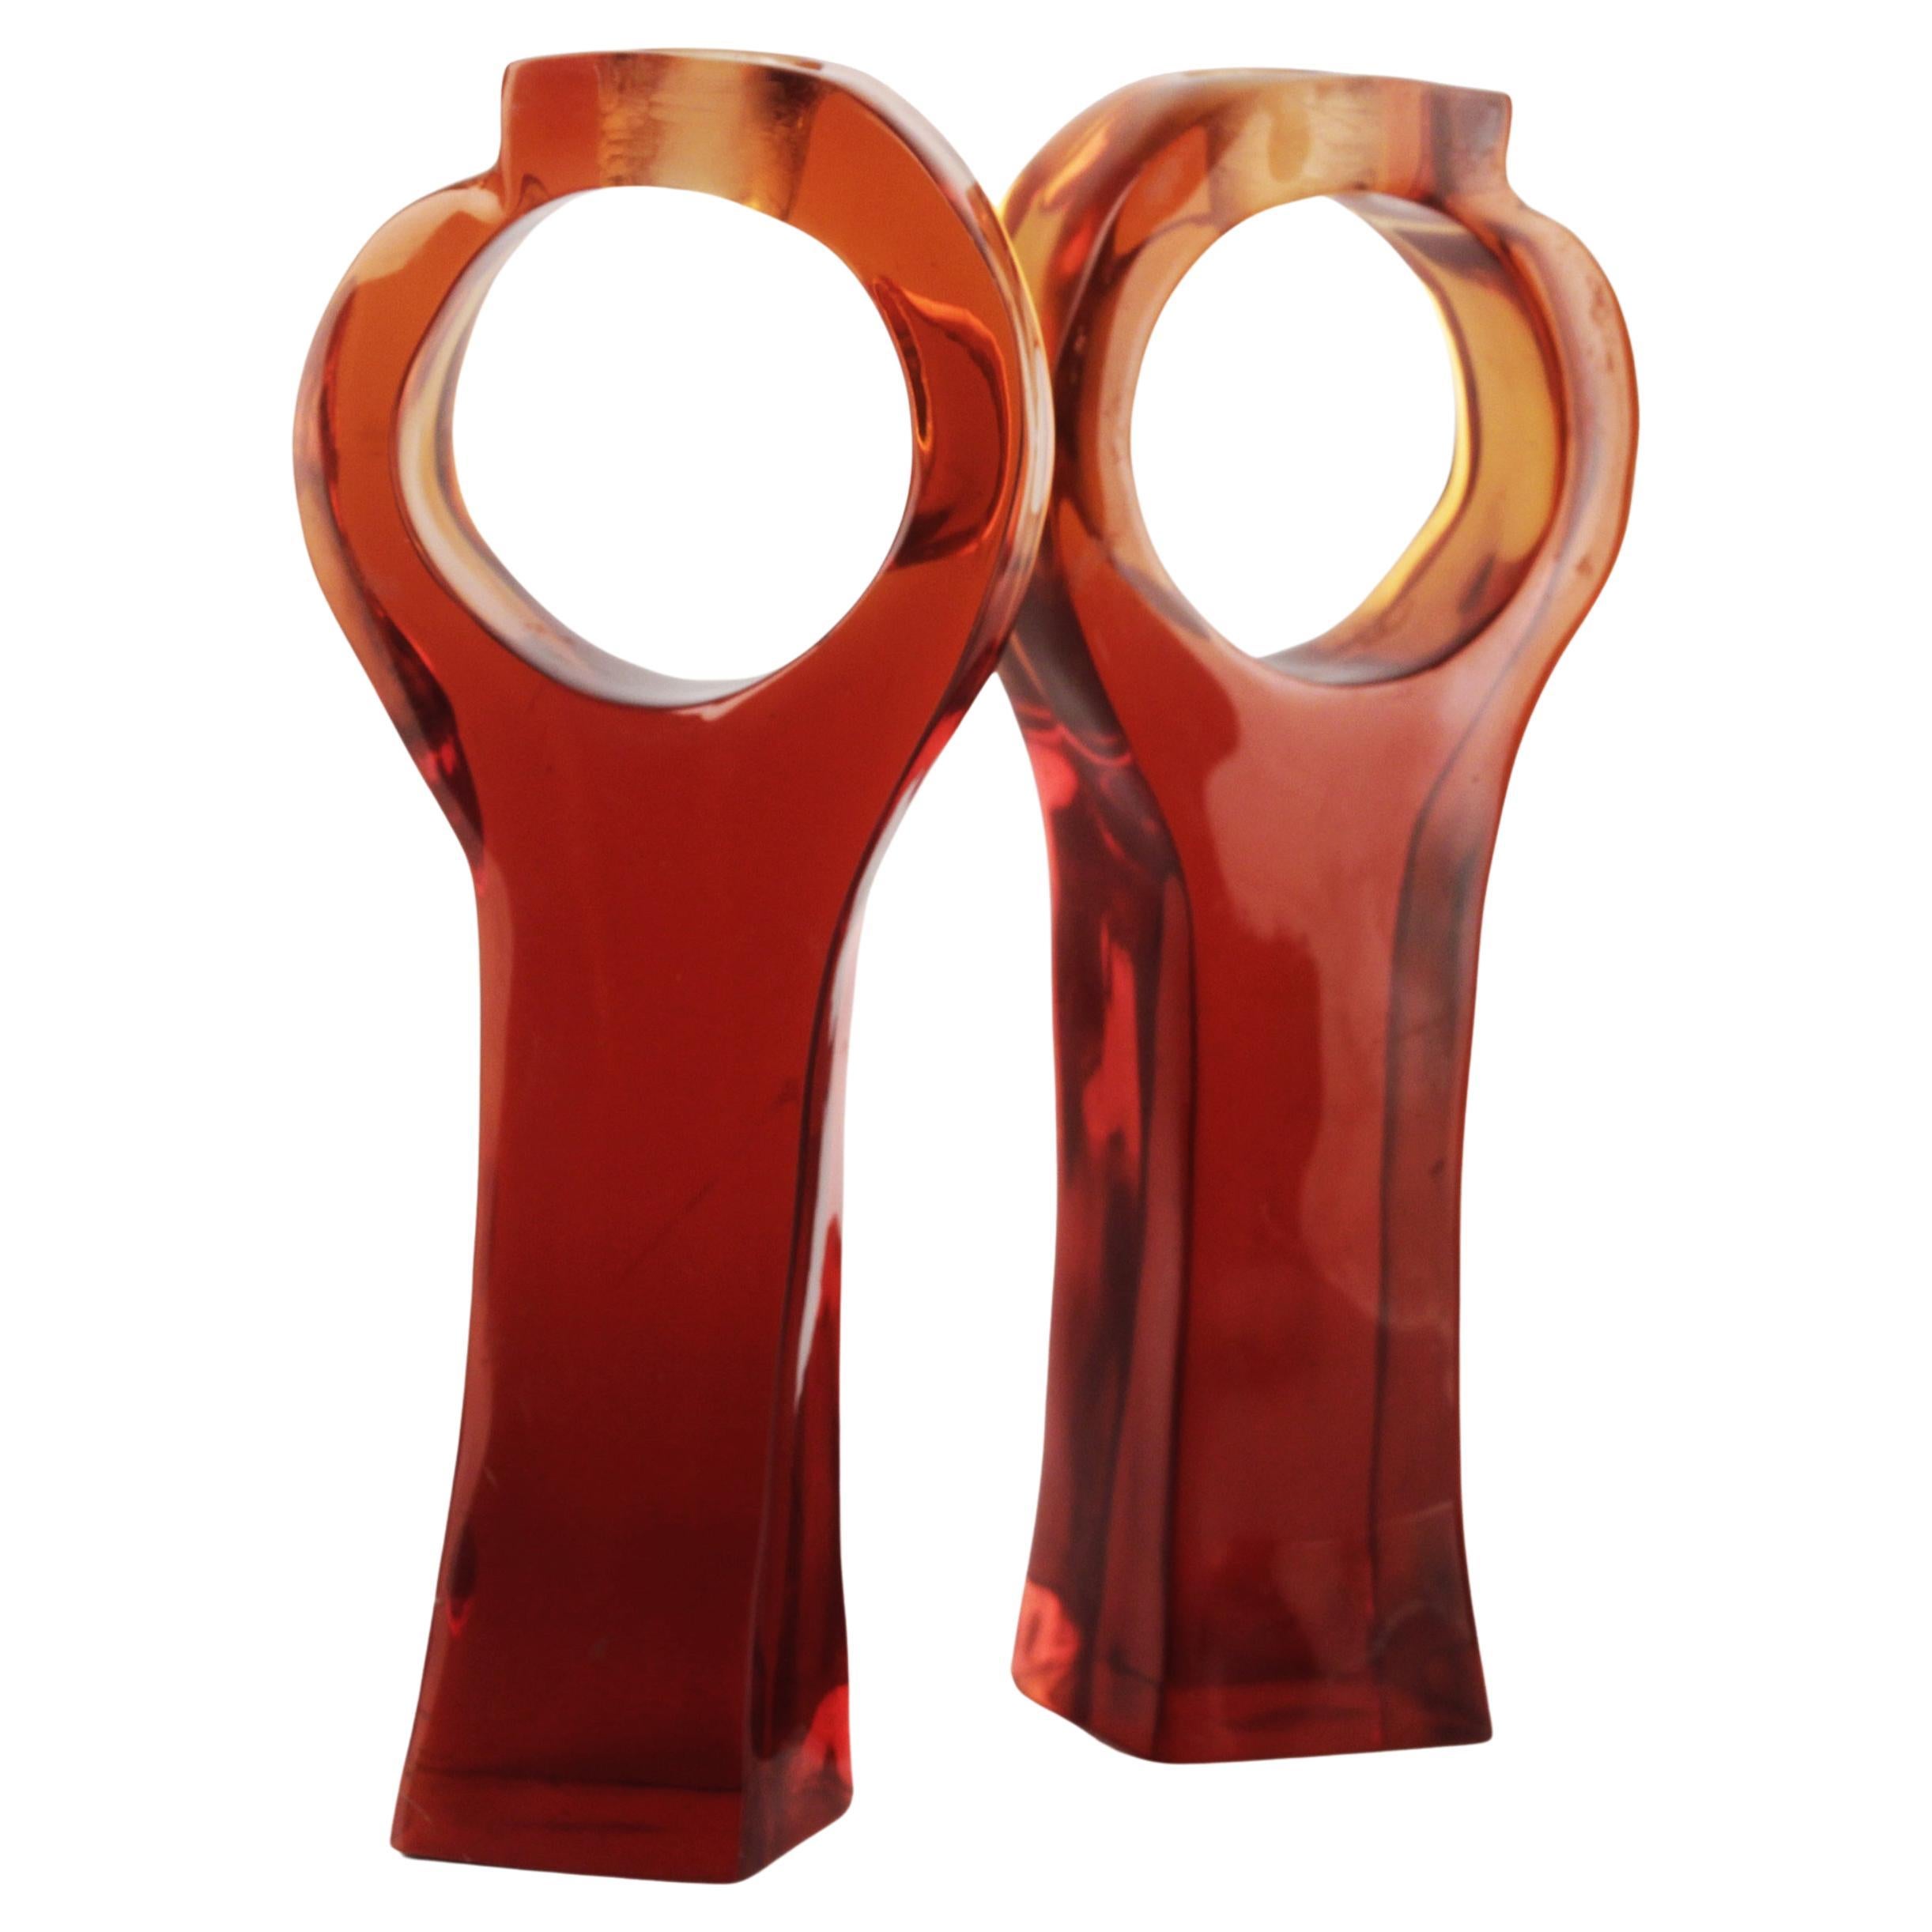 Pair of Italian Mid-Century Modern Red Acrylic/Lucite Geometric Candle Holders